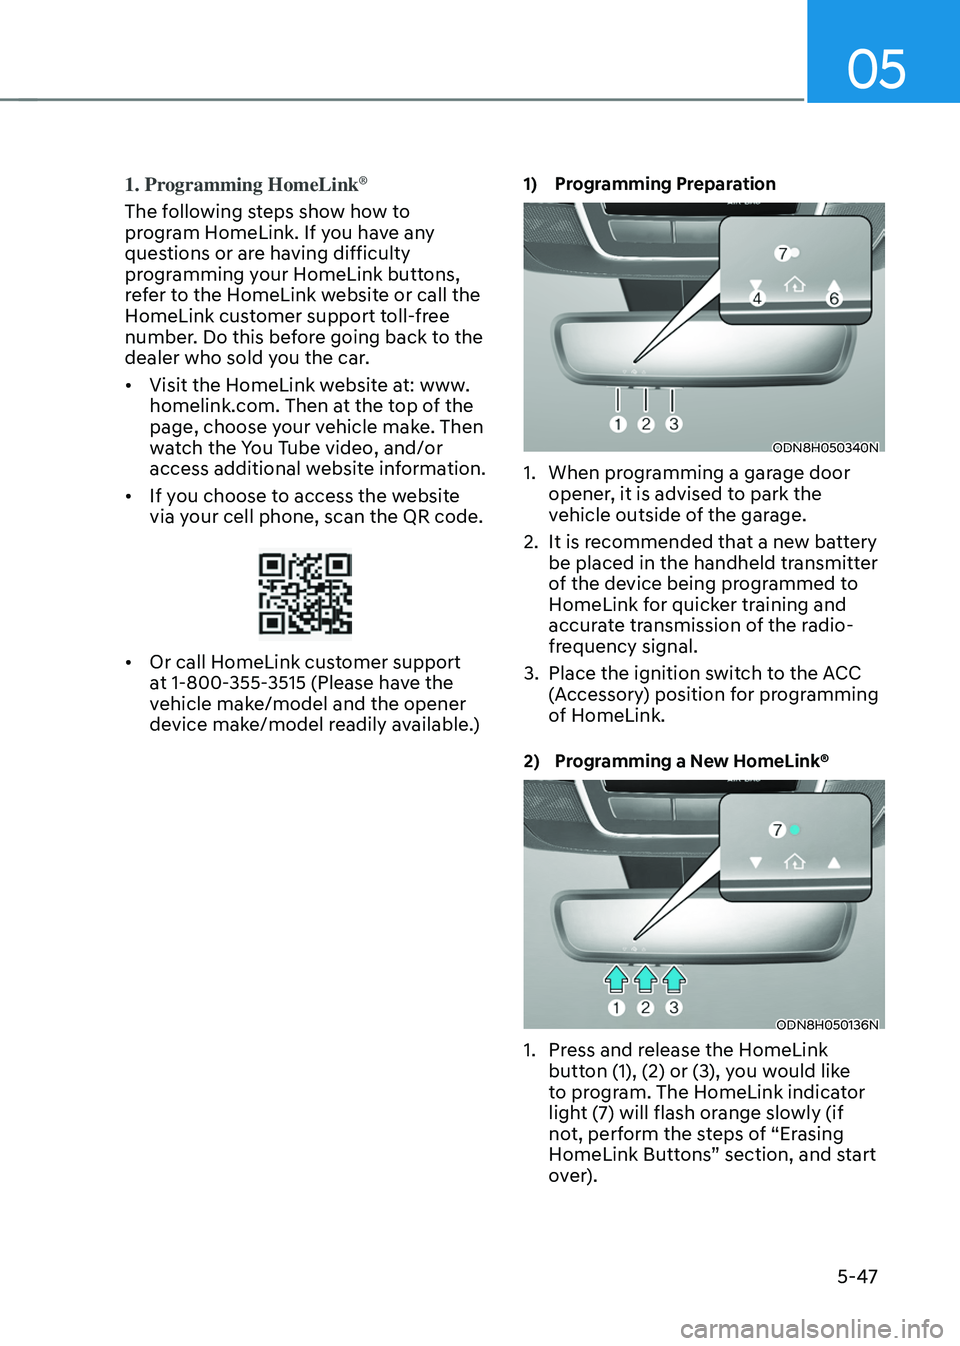 HYUNDAI TUCSON HYBRID 2022  Owners Manual 05
5-47
1. Programming HomeLink®
The following steps show how to 
program HomeLink. If you have any 
questions or are having difficulty 
programming your HomeLink buttons, 
refer to the HomeLink webs